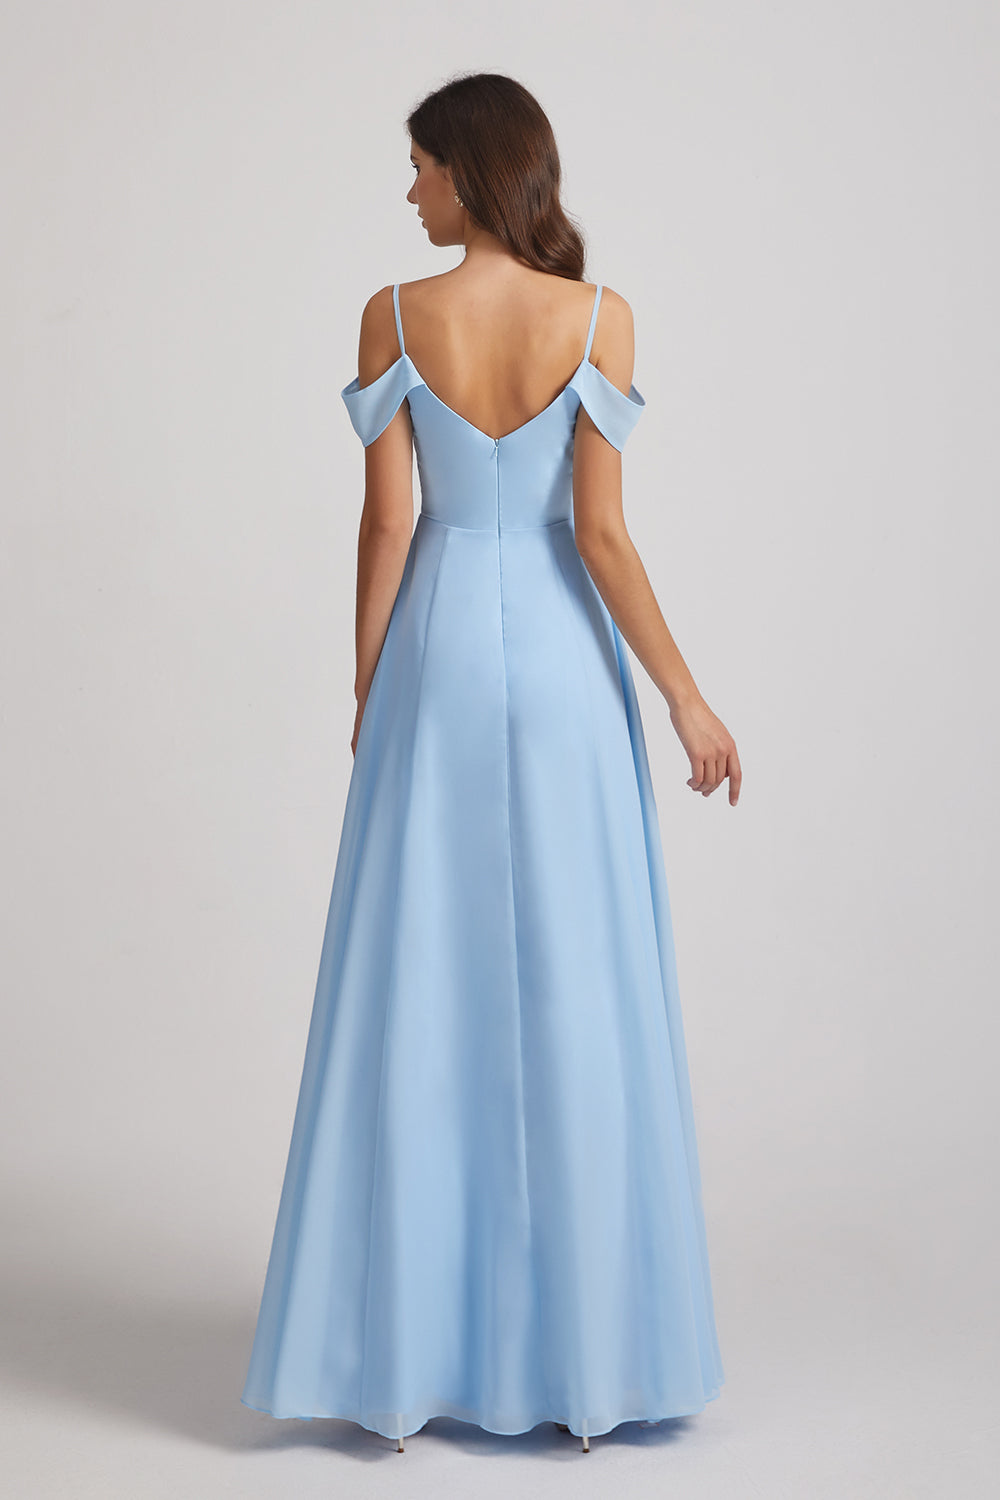 stunning gowns for your party